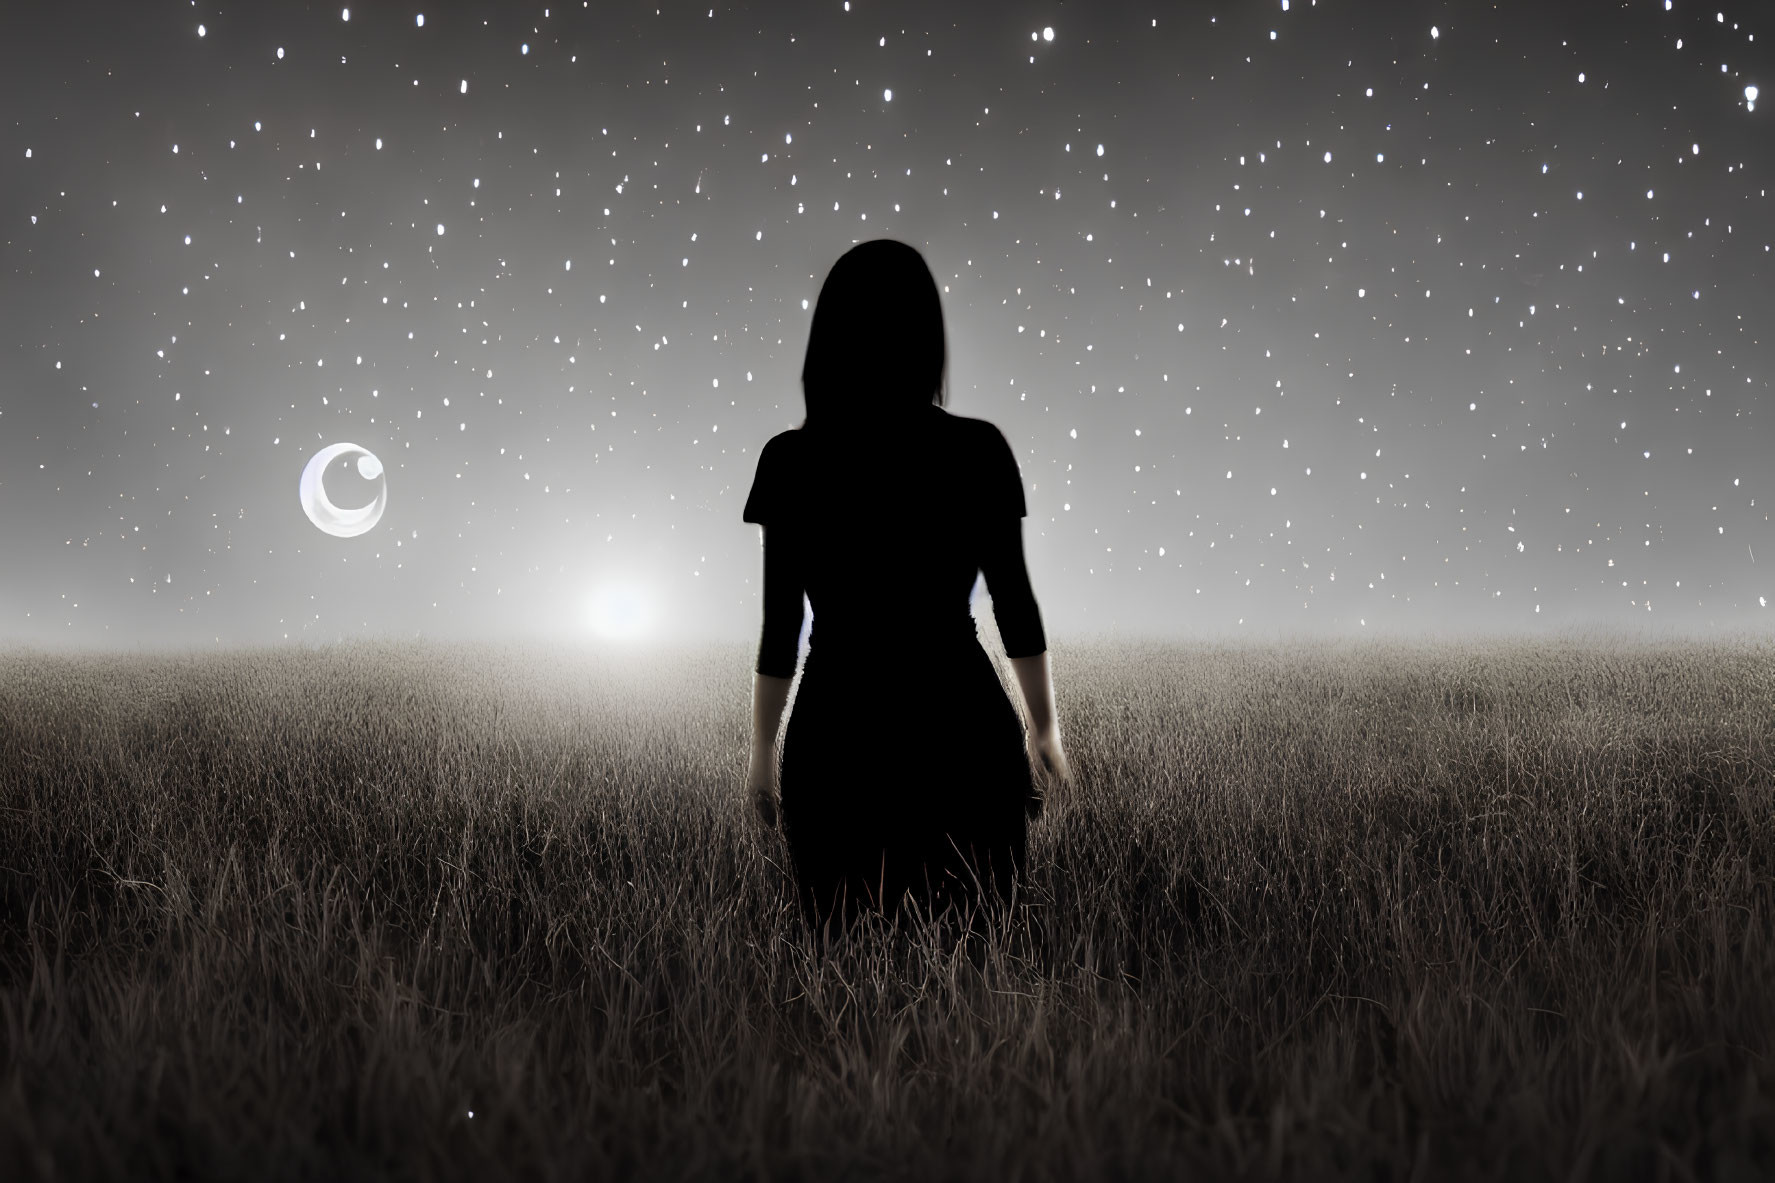 Silhouette of woman in field under starry night sky with crescent moon